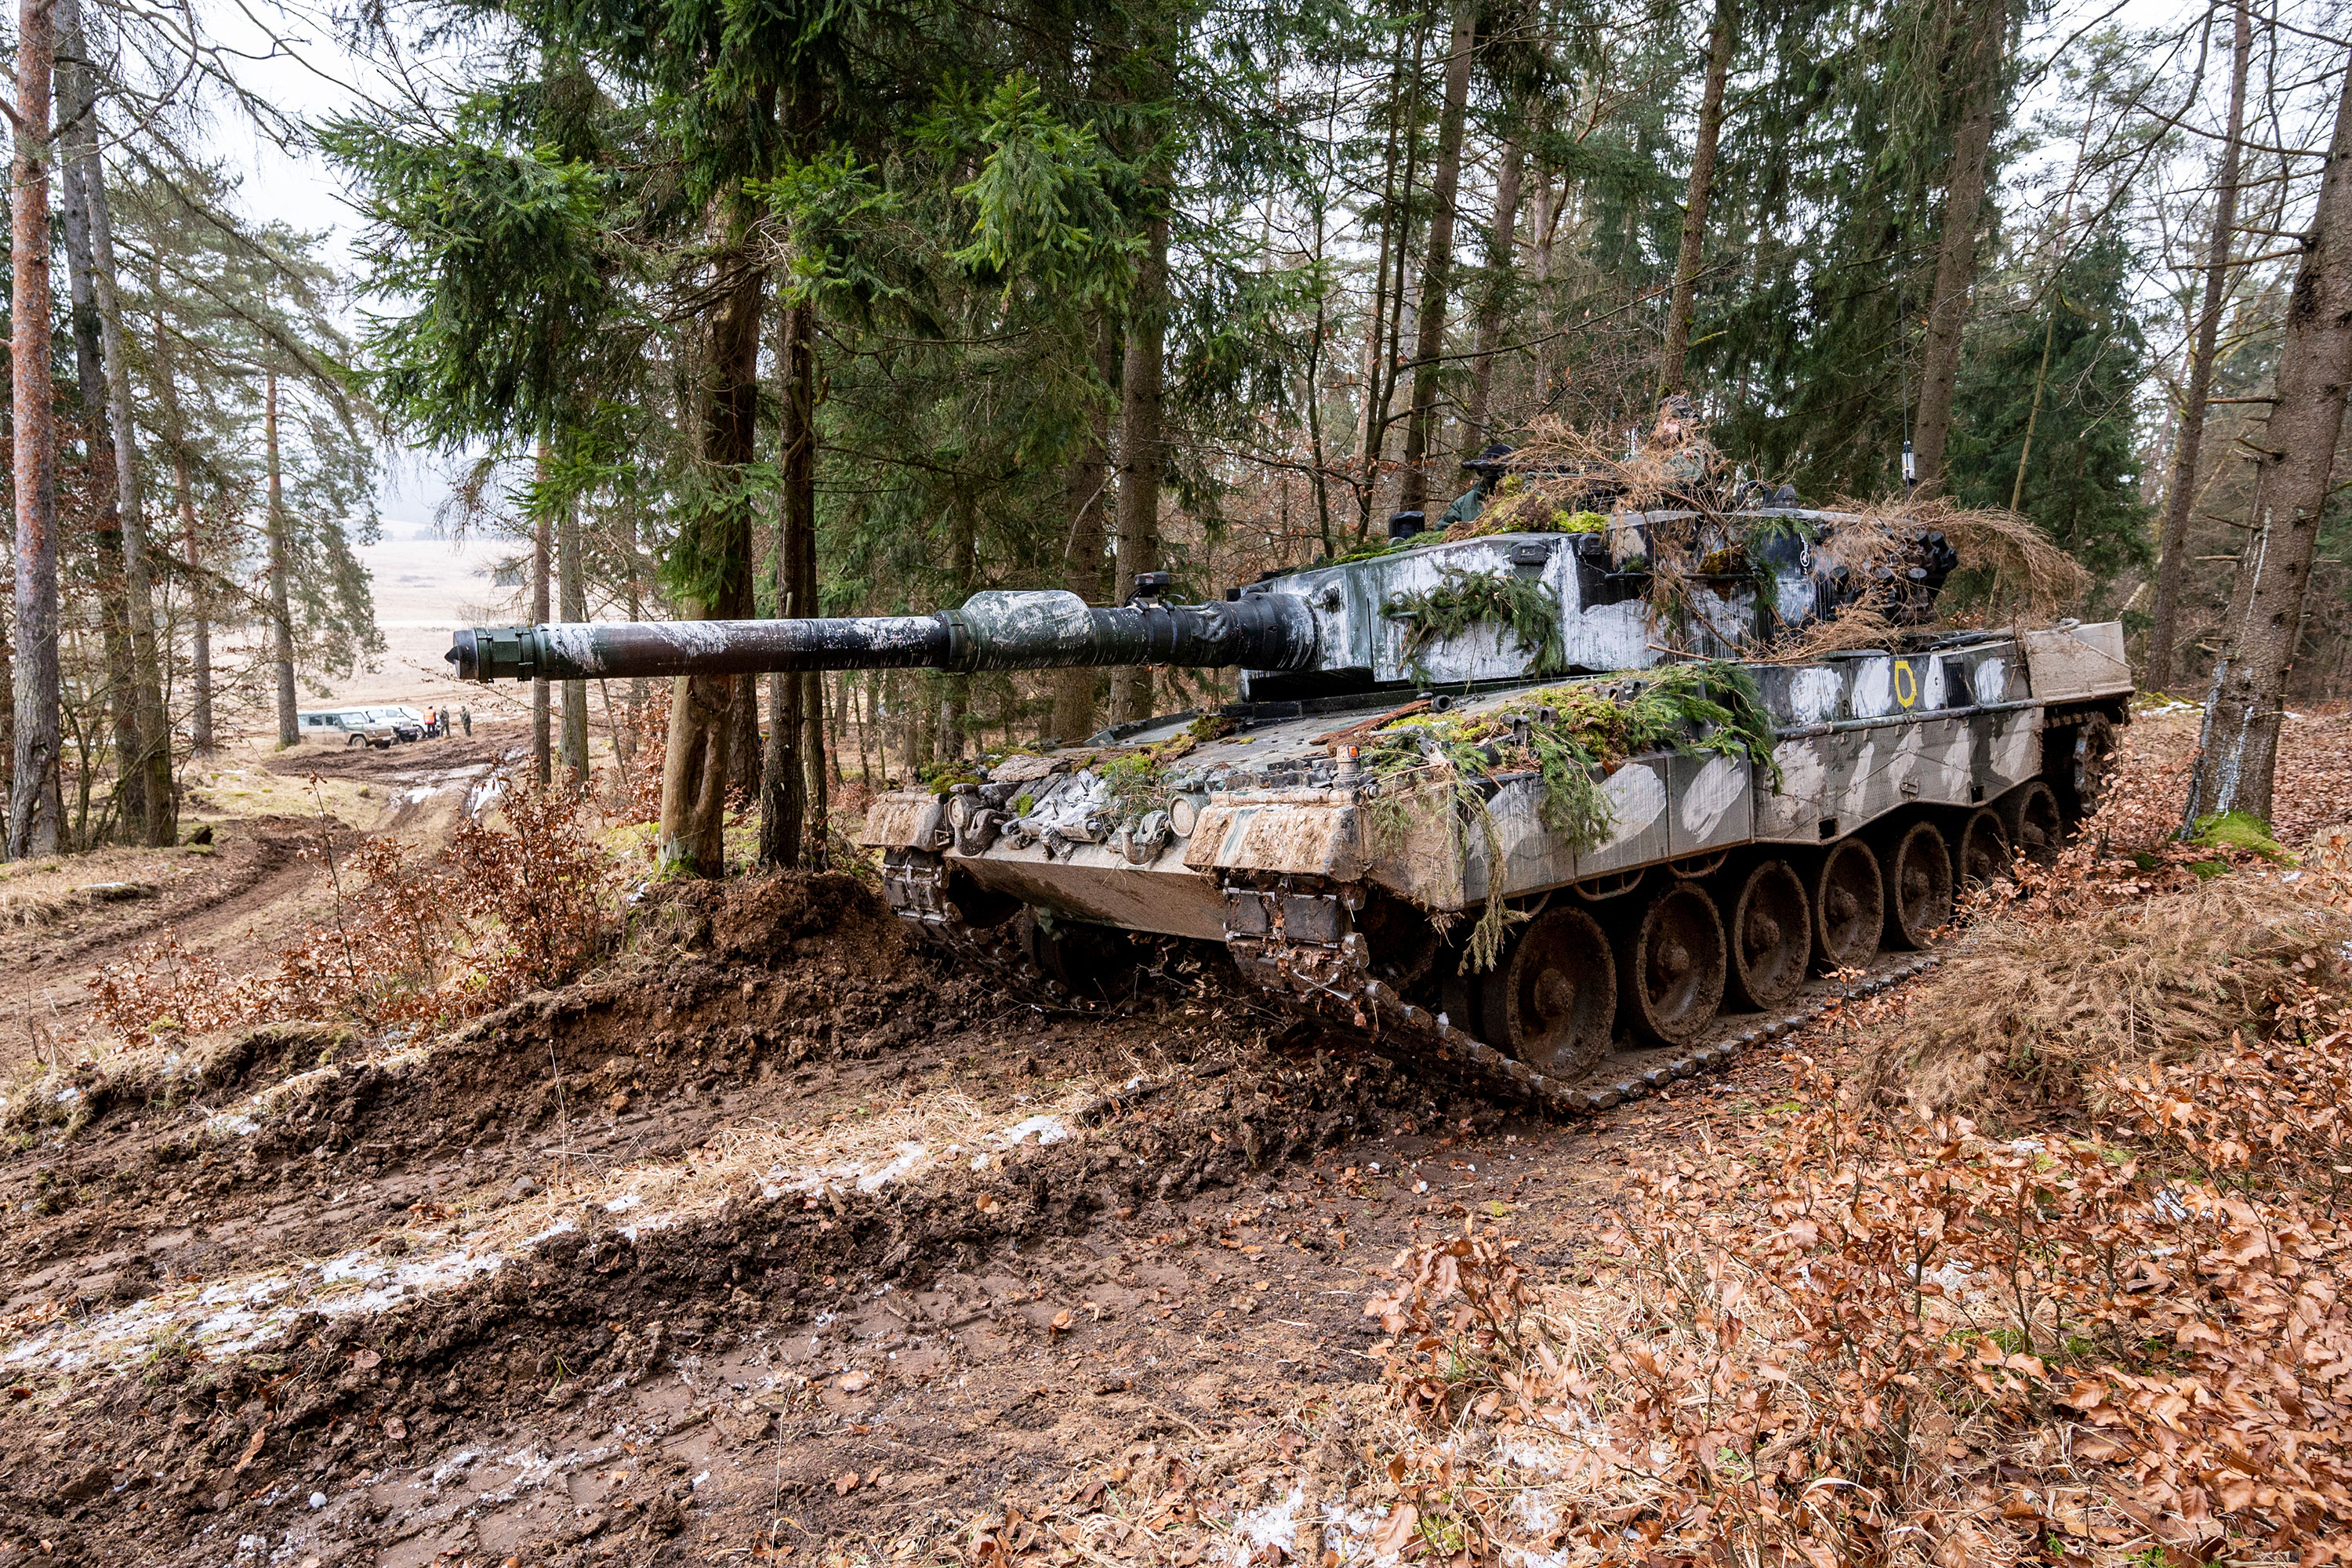 A Polish Leopard 2 tank stands in a wooded area during a military exercise in Hohenfels, Germany, in January 2022.